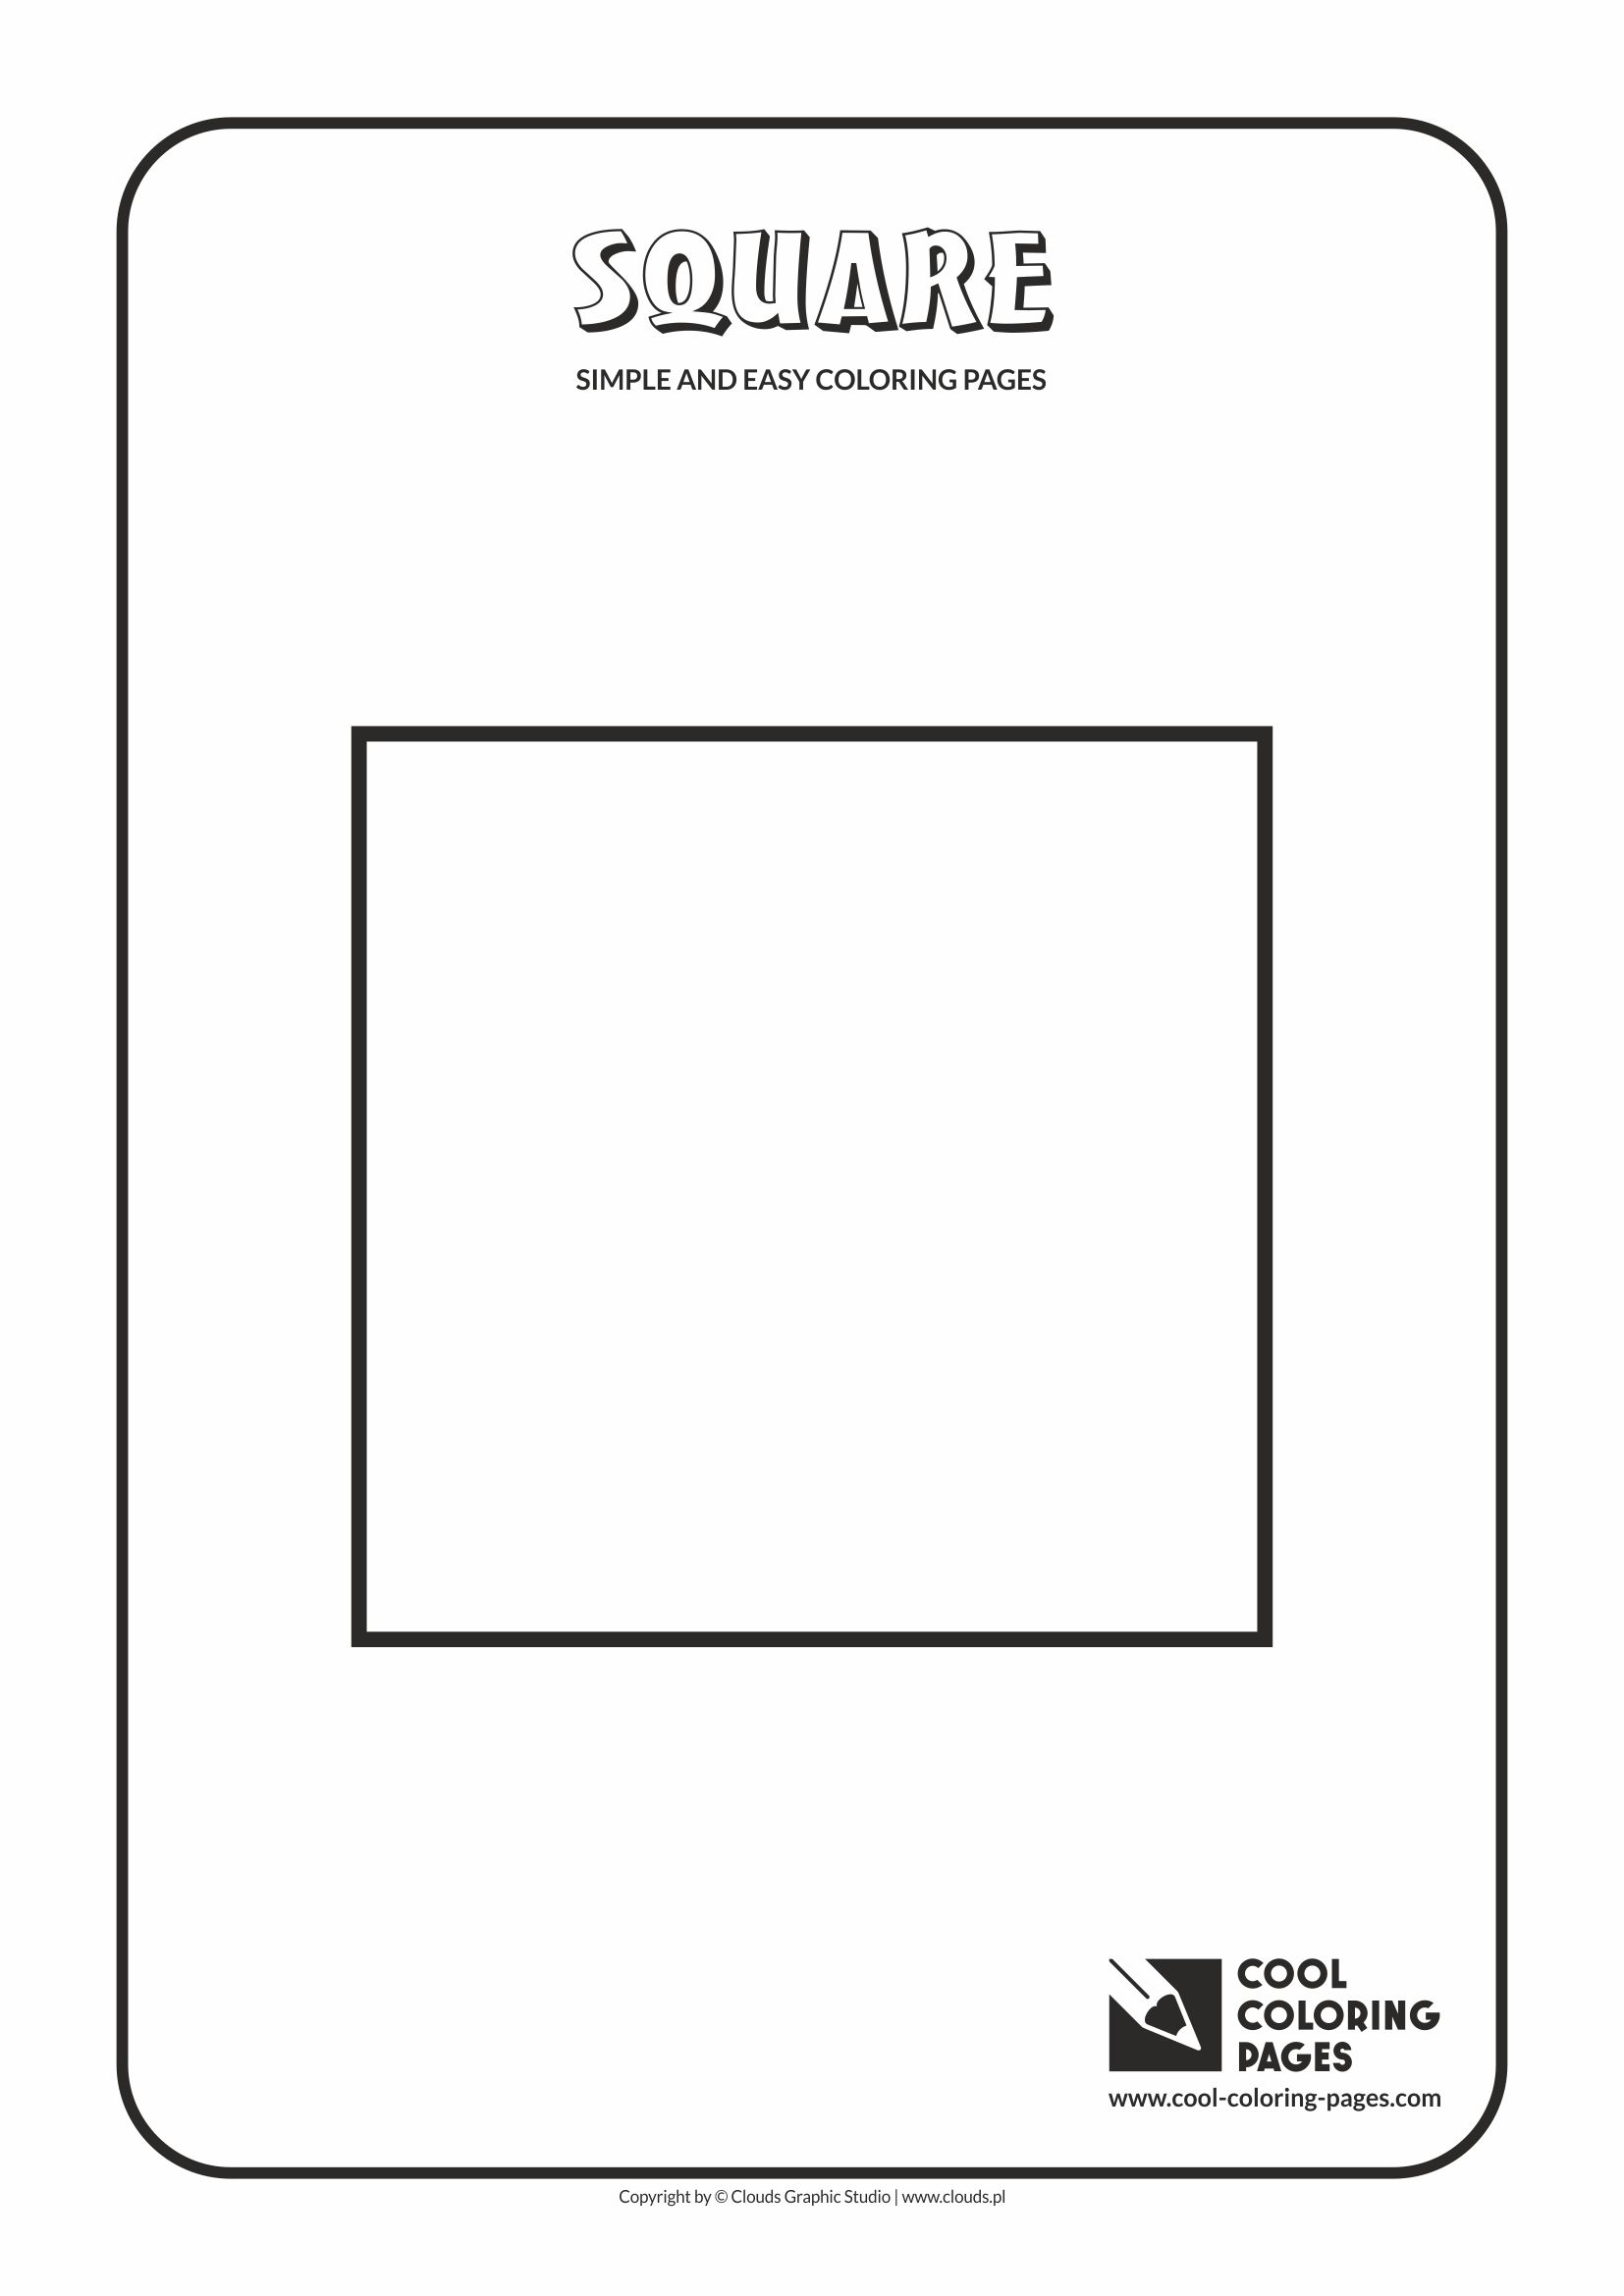 Simple and easy coloring pages for toddlers - Square